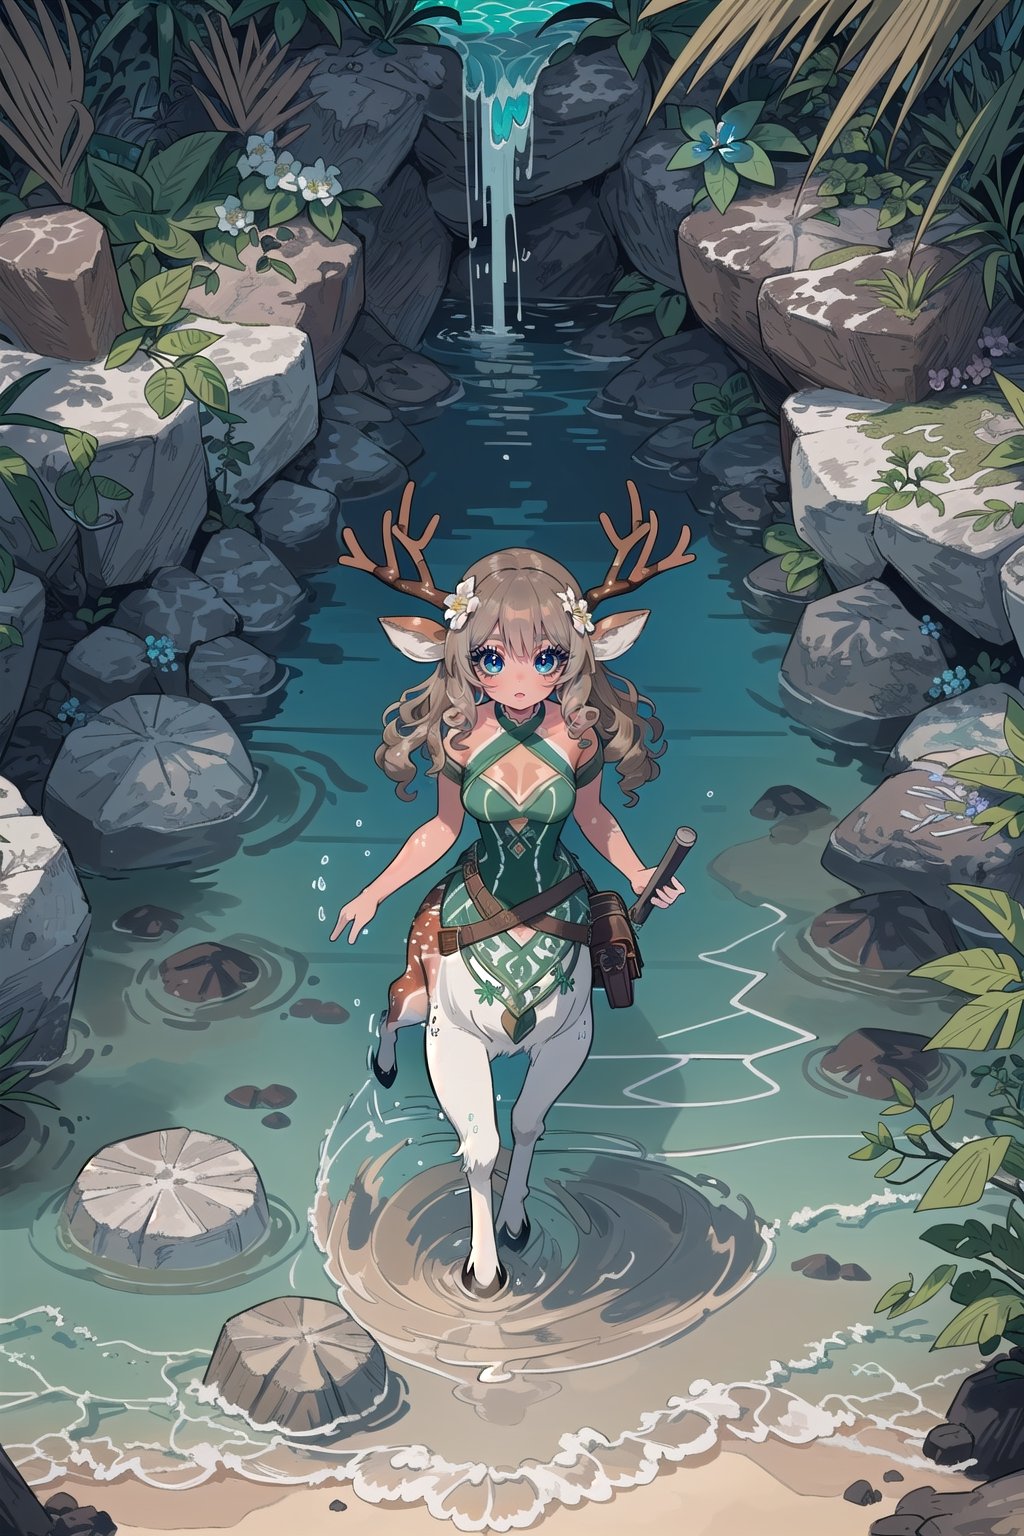 (adult female, single character, human upper half, Centaur with deer body lower half, centaur, light tan fur with white spots, centaur with deer body with light tan deer fur with white spots on rump, deer ears, light brown fur body, thin, petite, medium breasts, small deer tail, deer legs), (very long dark brown wavey curly hair on head, very detailed hair, small flowering vines woven in hair on head, flowers in hair on head, flowers woven in hair), ornate pirate outfit,  excited, full of energy, full body view, attractive, angular face, adventurer, character focus, very detailed, high detail, masterpiece, high quality, saddle bags, extremely high detailed, complex backgroud, vibrant tropical island, detailed tropical scenery, very detailed beach with clear water, very detailed clear water with fish swimming near legs, lower legs under water, tropical flowers growing everywhere, very detailed fur, petite lower body,  flower shaped white fur markings, small semetrical antlers, rows of cascading flowers in hair, long light brown hair, hoofed, deer hoofs